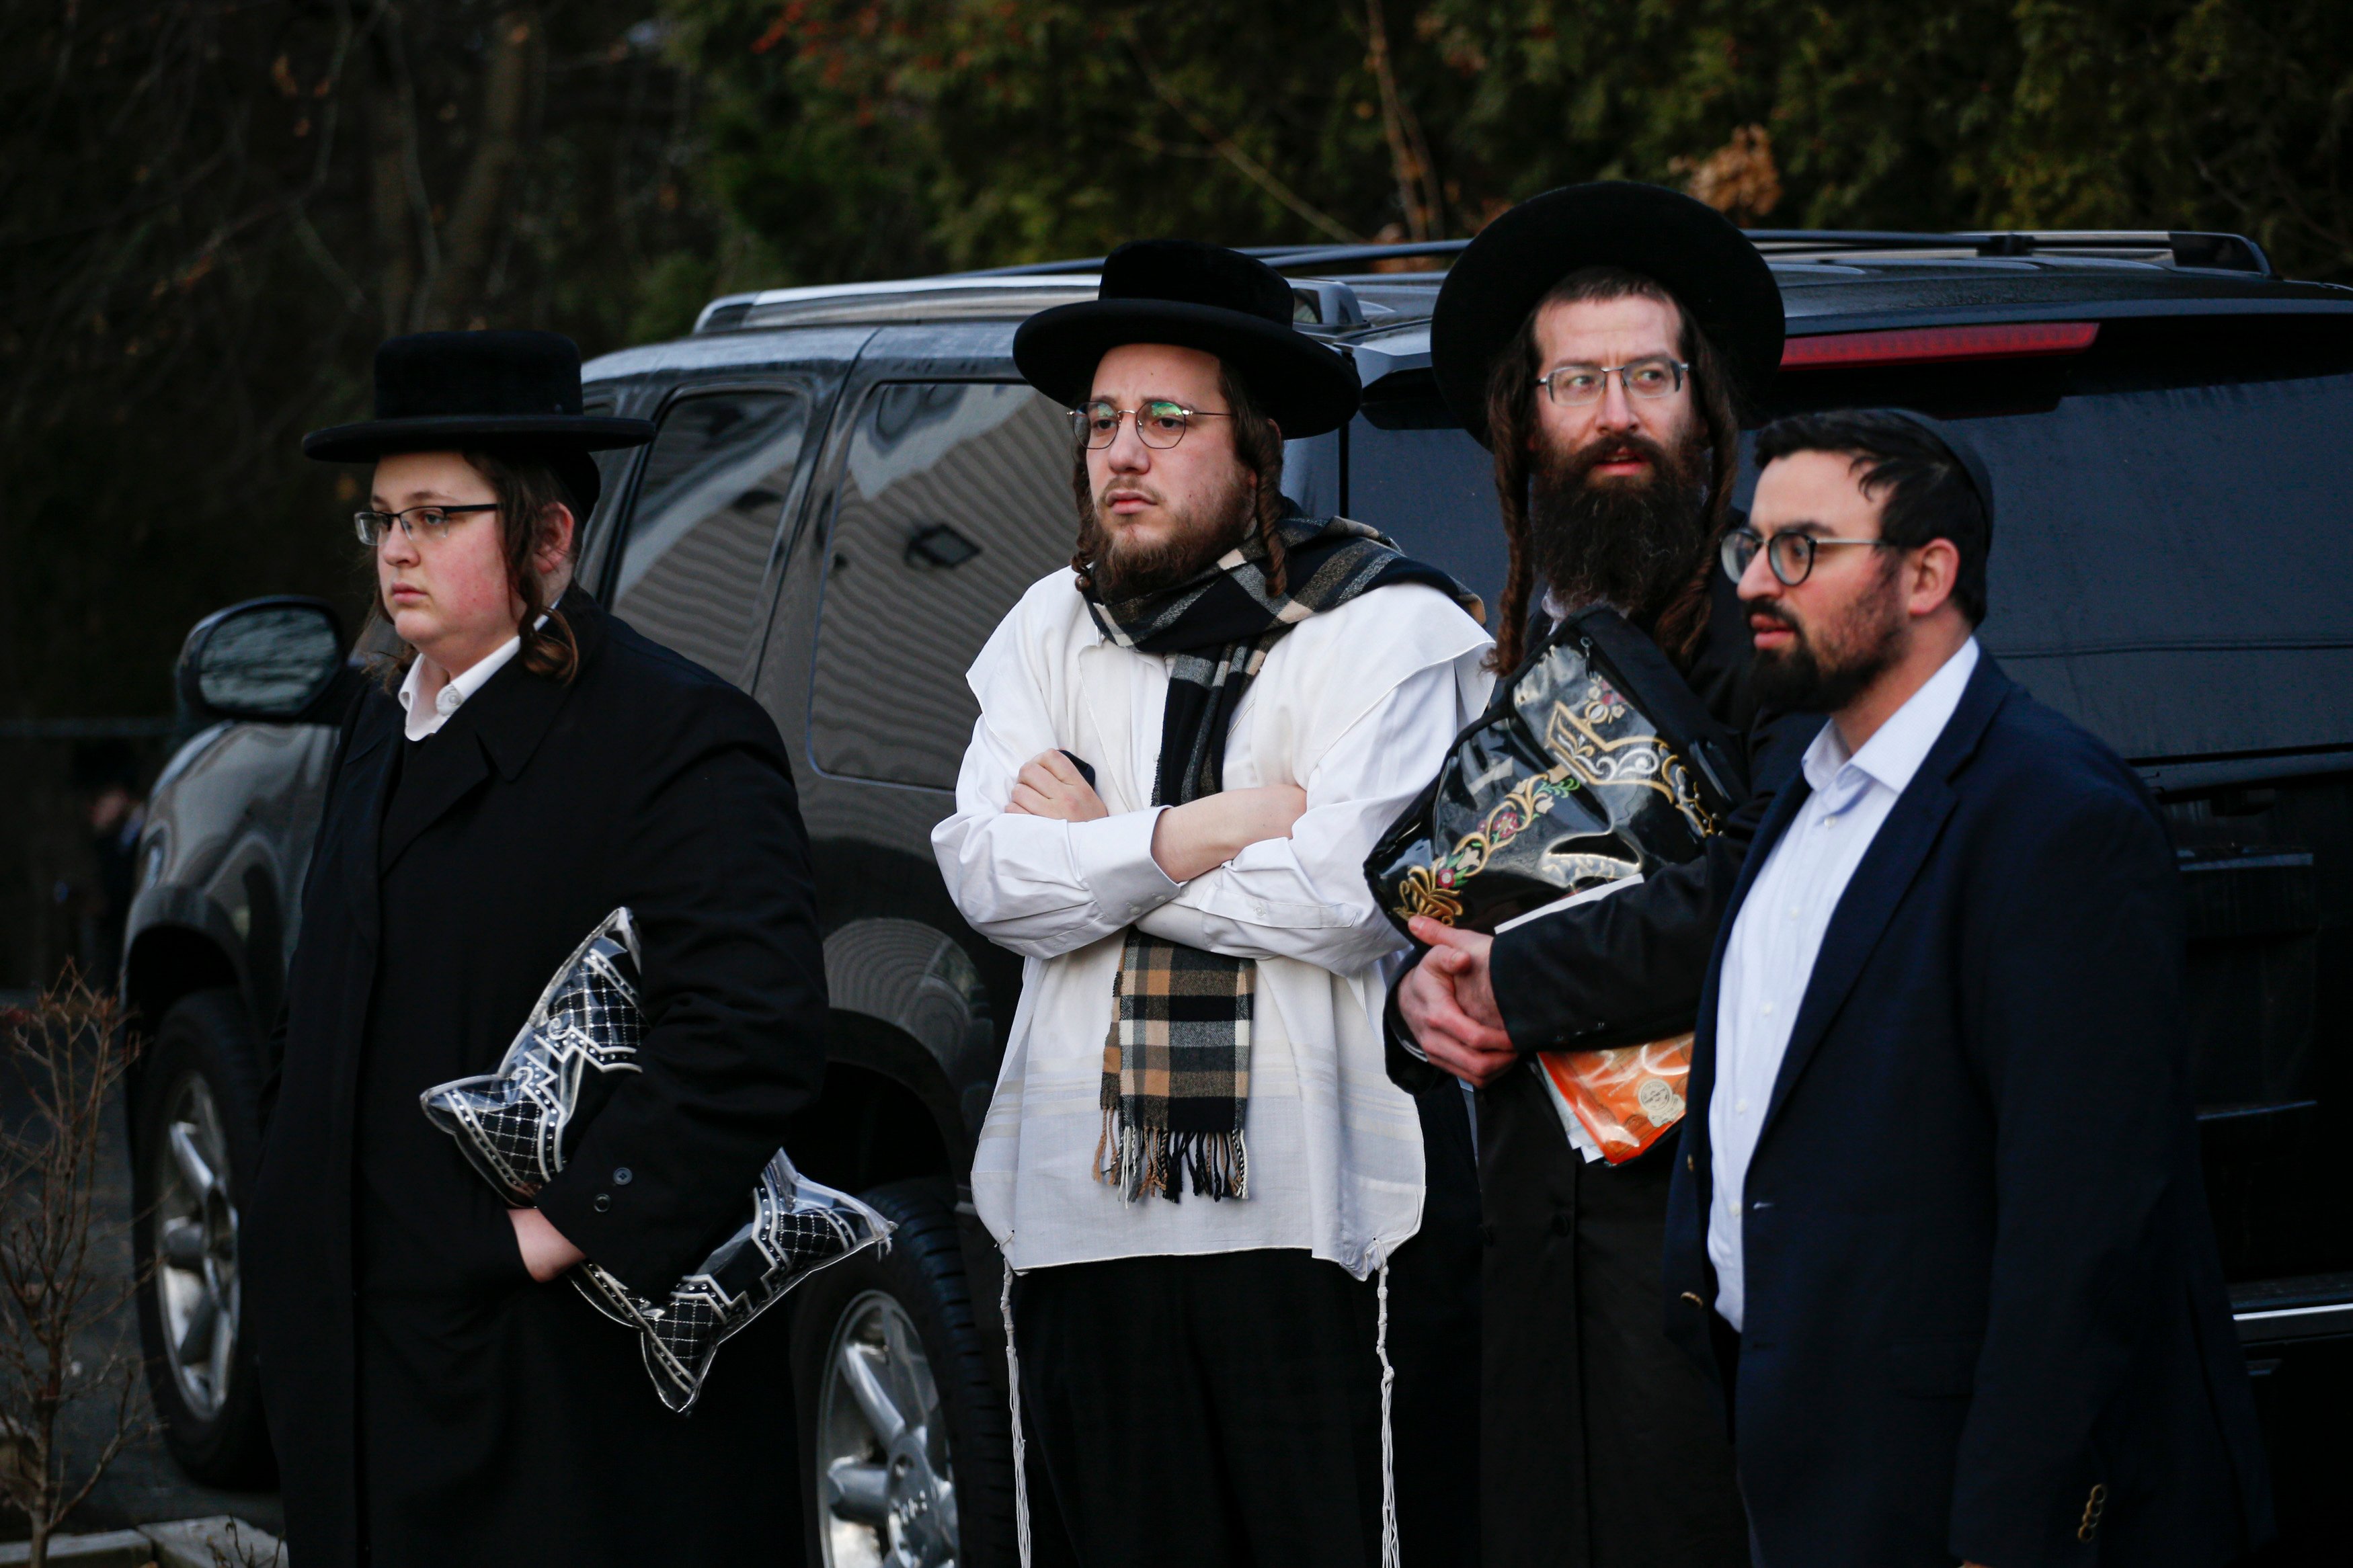 Members of the Jewish community gather outside the home of rabbi Chaim Rottenbergin Monsey, in New York on December 29, 2019. (KENA BETANCUR/AFP via Getty Images)